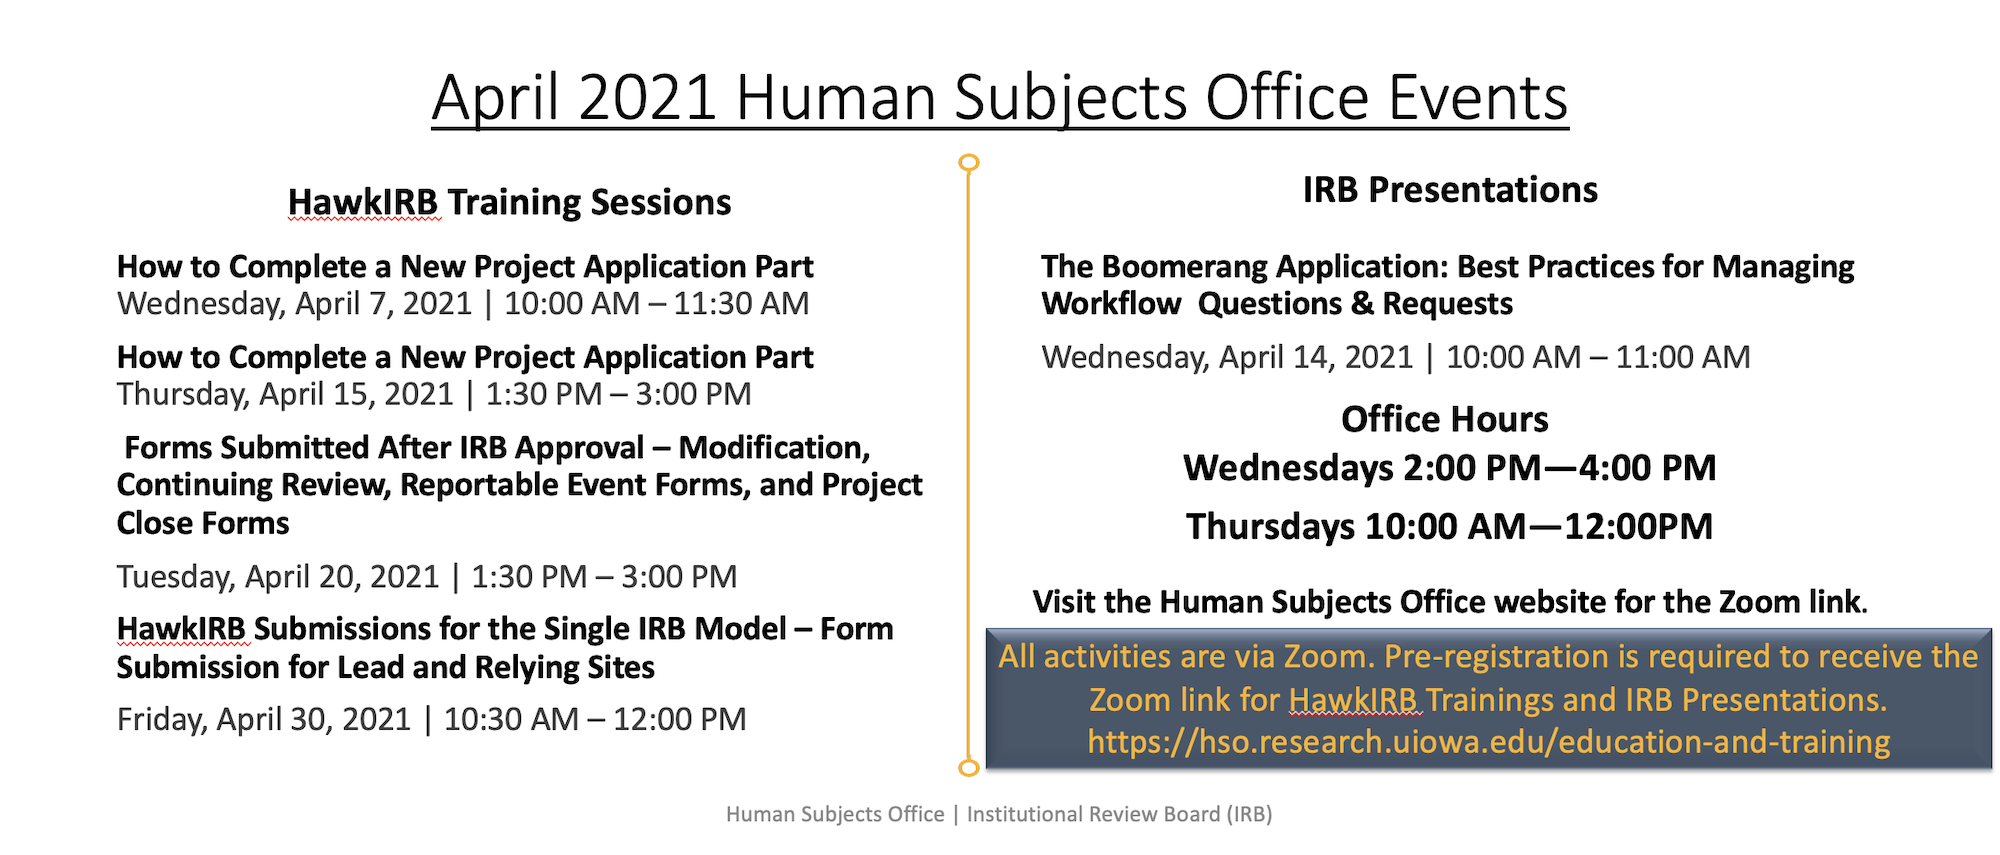 April 2021 Human Subjects Office Events